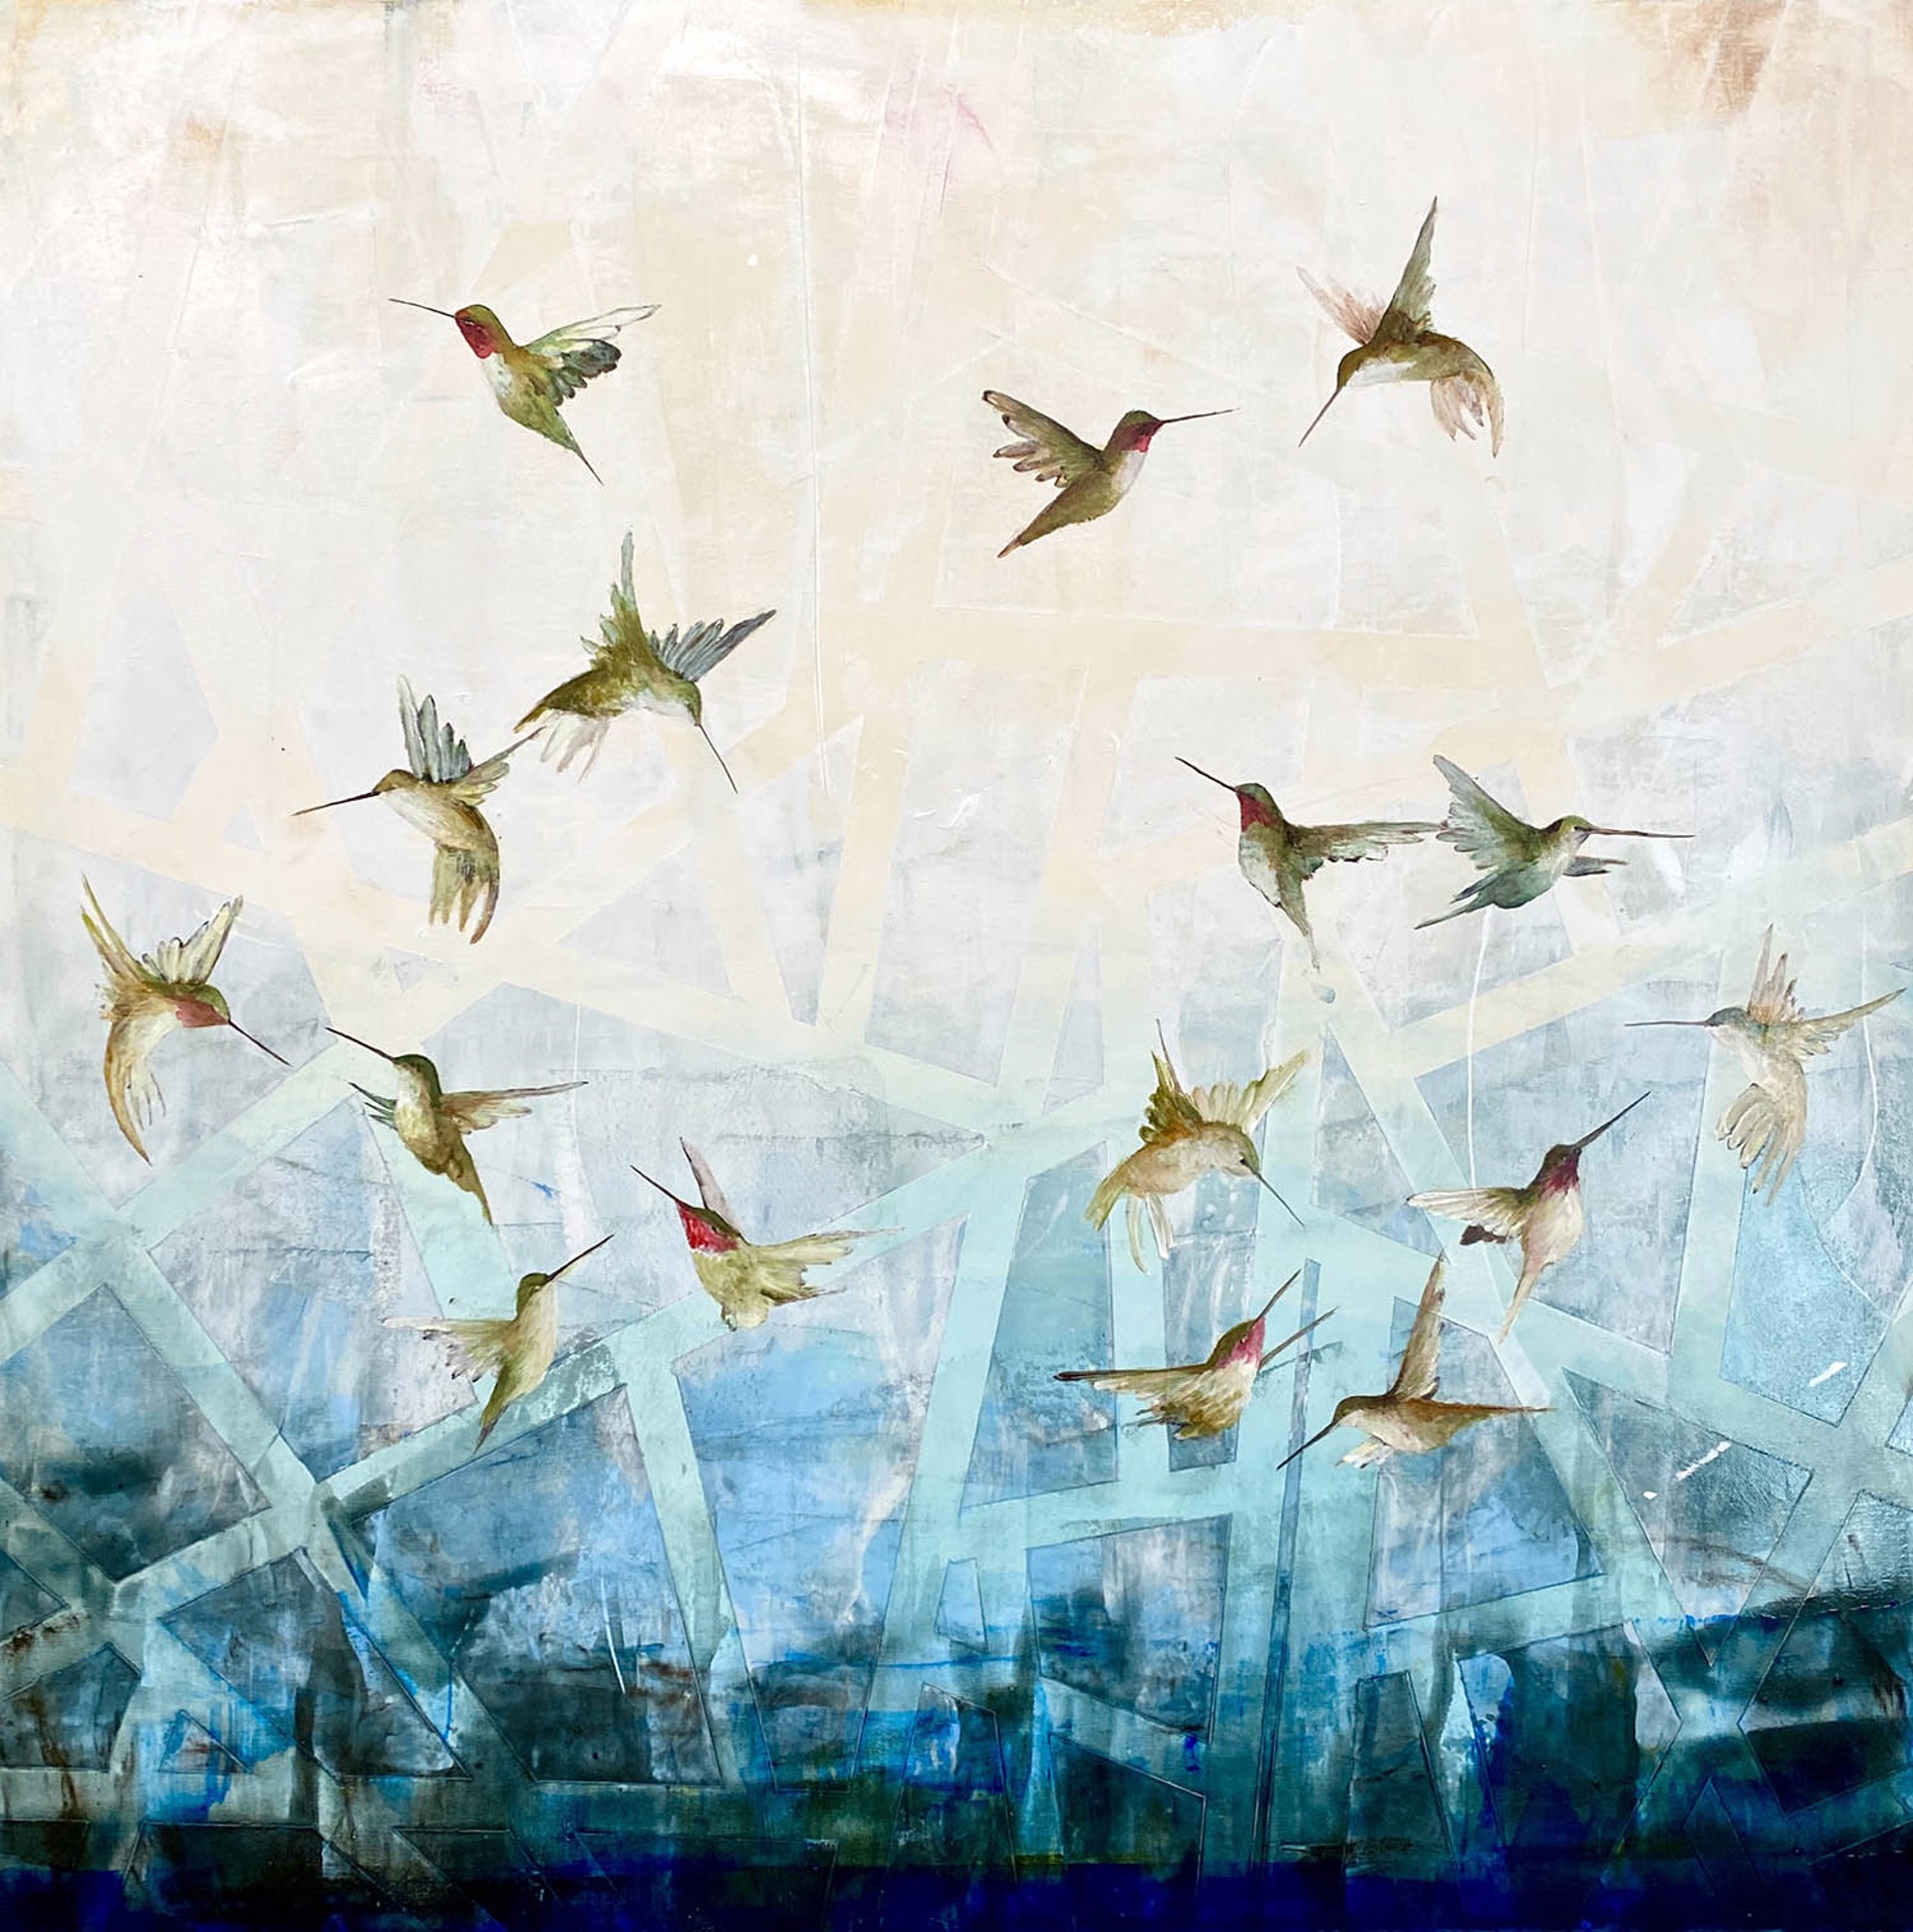 Original Oil Painting By Jenna Von Benedikt Featuring A Flurry Of Hummingbirds Over Abstract Background In Blue